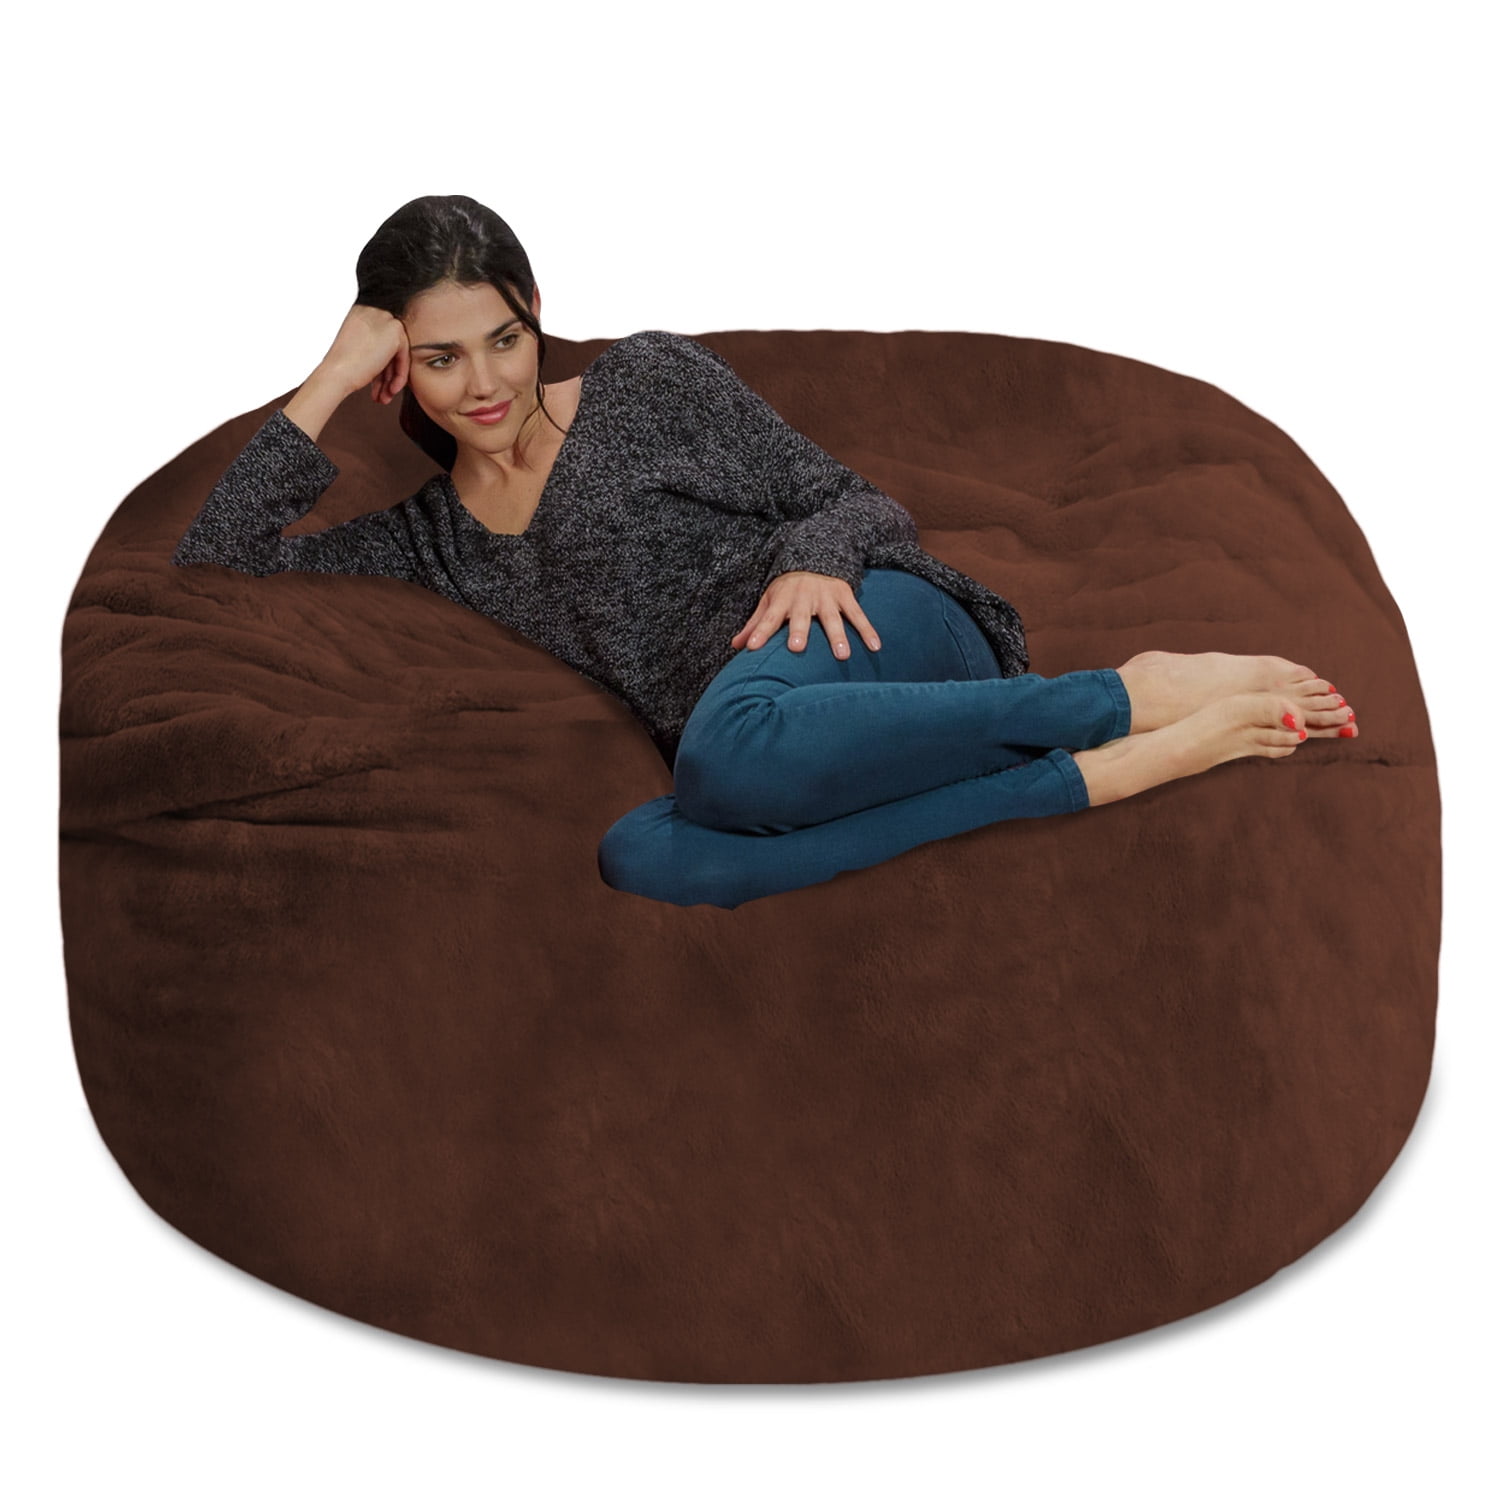 How to Fill a Bean Bag 